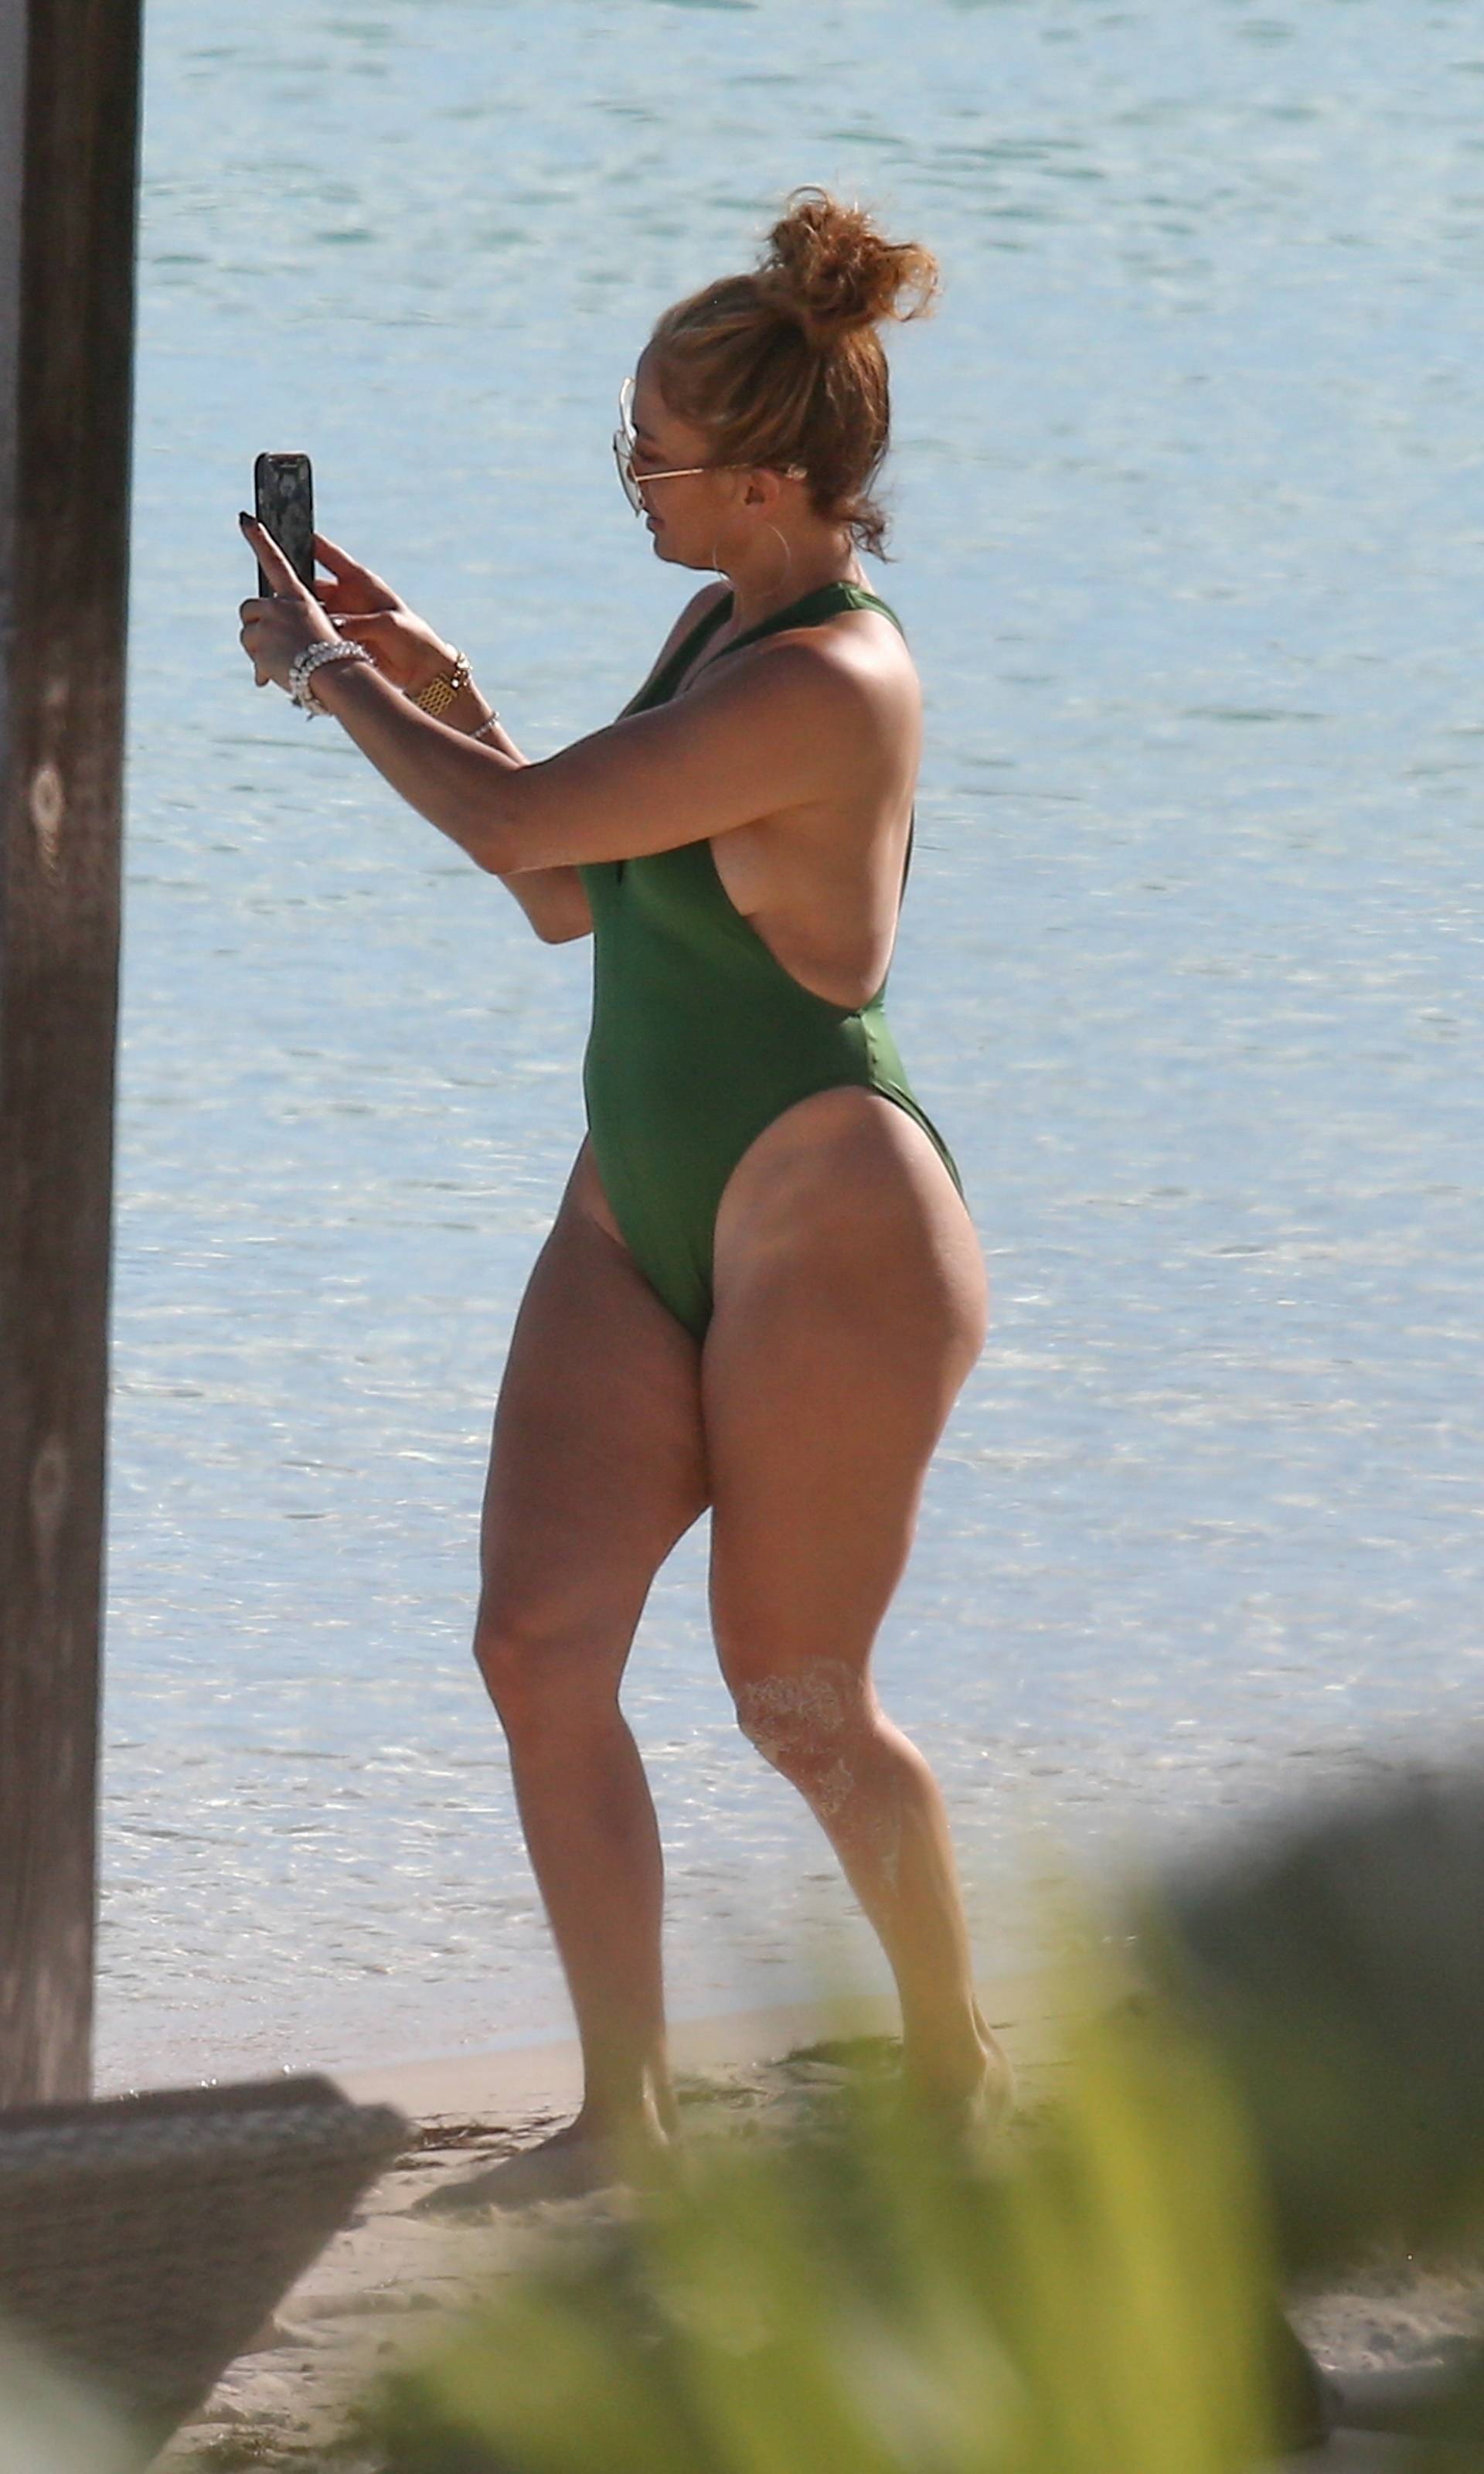 *PREMIUM-EXCLUSIVE* Jennifer Lopez is pictured in plunging green swimsuit as she soaks in the sun in Turks and Caicos **Web Embargo until 1 pm PST on January 15, 2021**